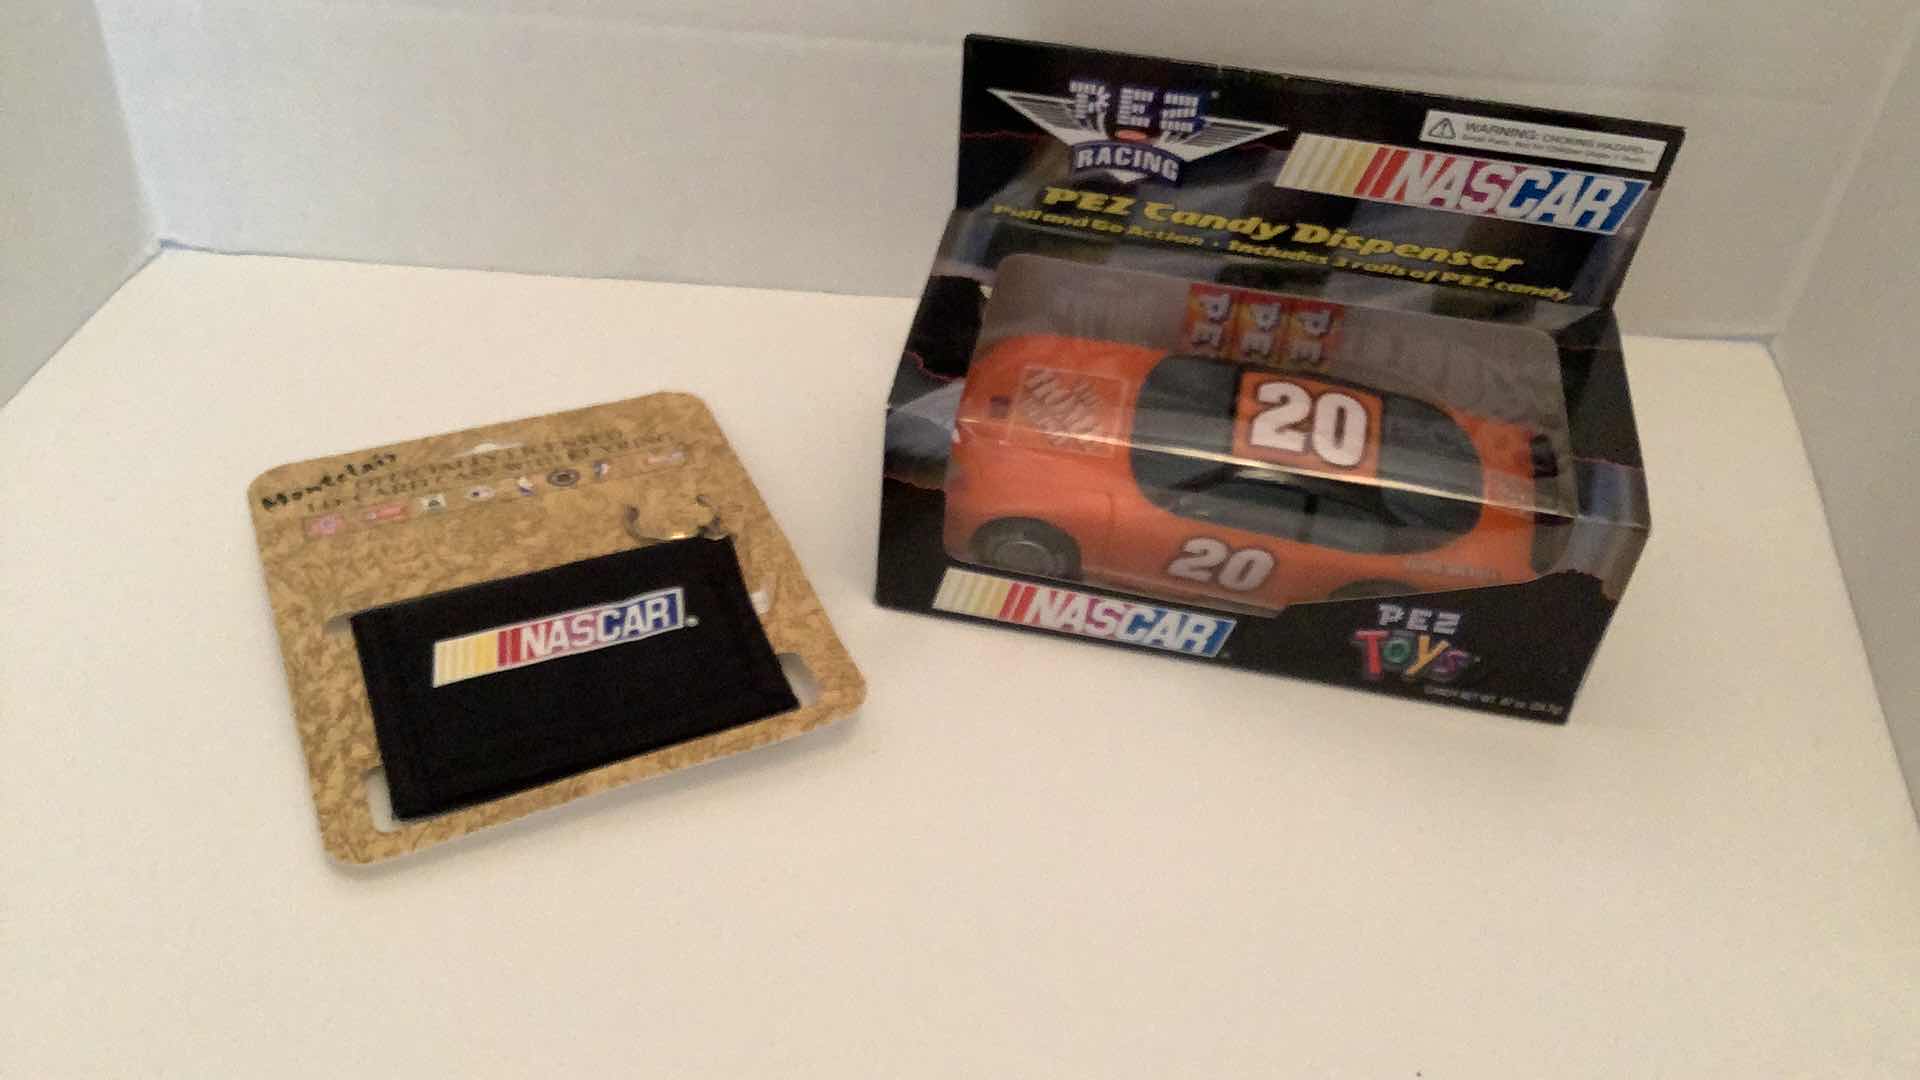 Photo 1 of NASCAR #20 PEZ CANDY DISPENSER AND CARD CASE